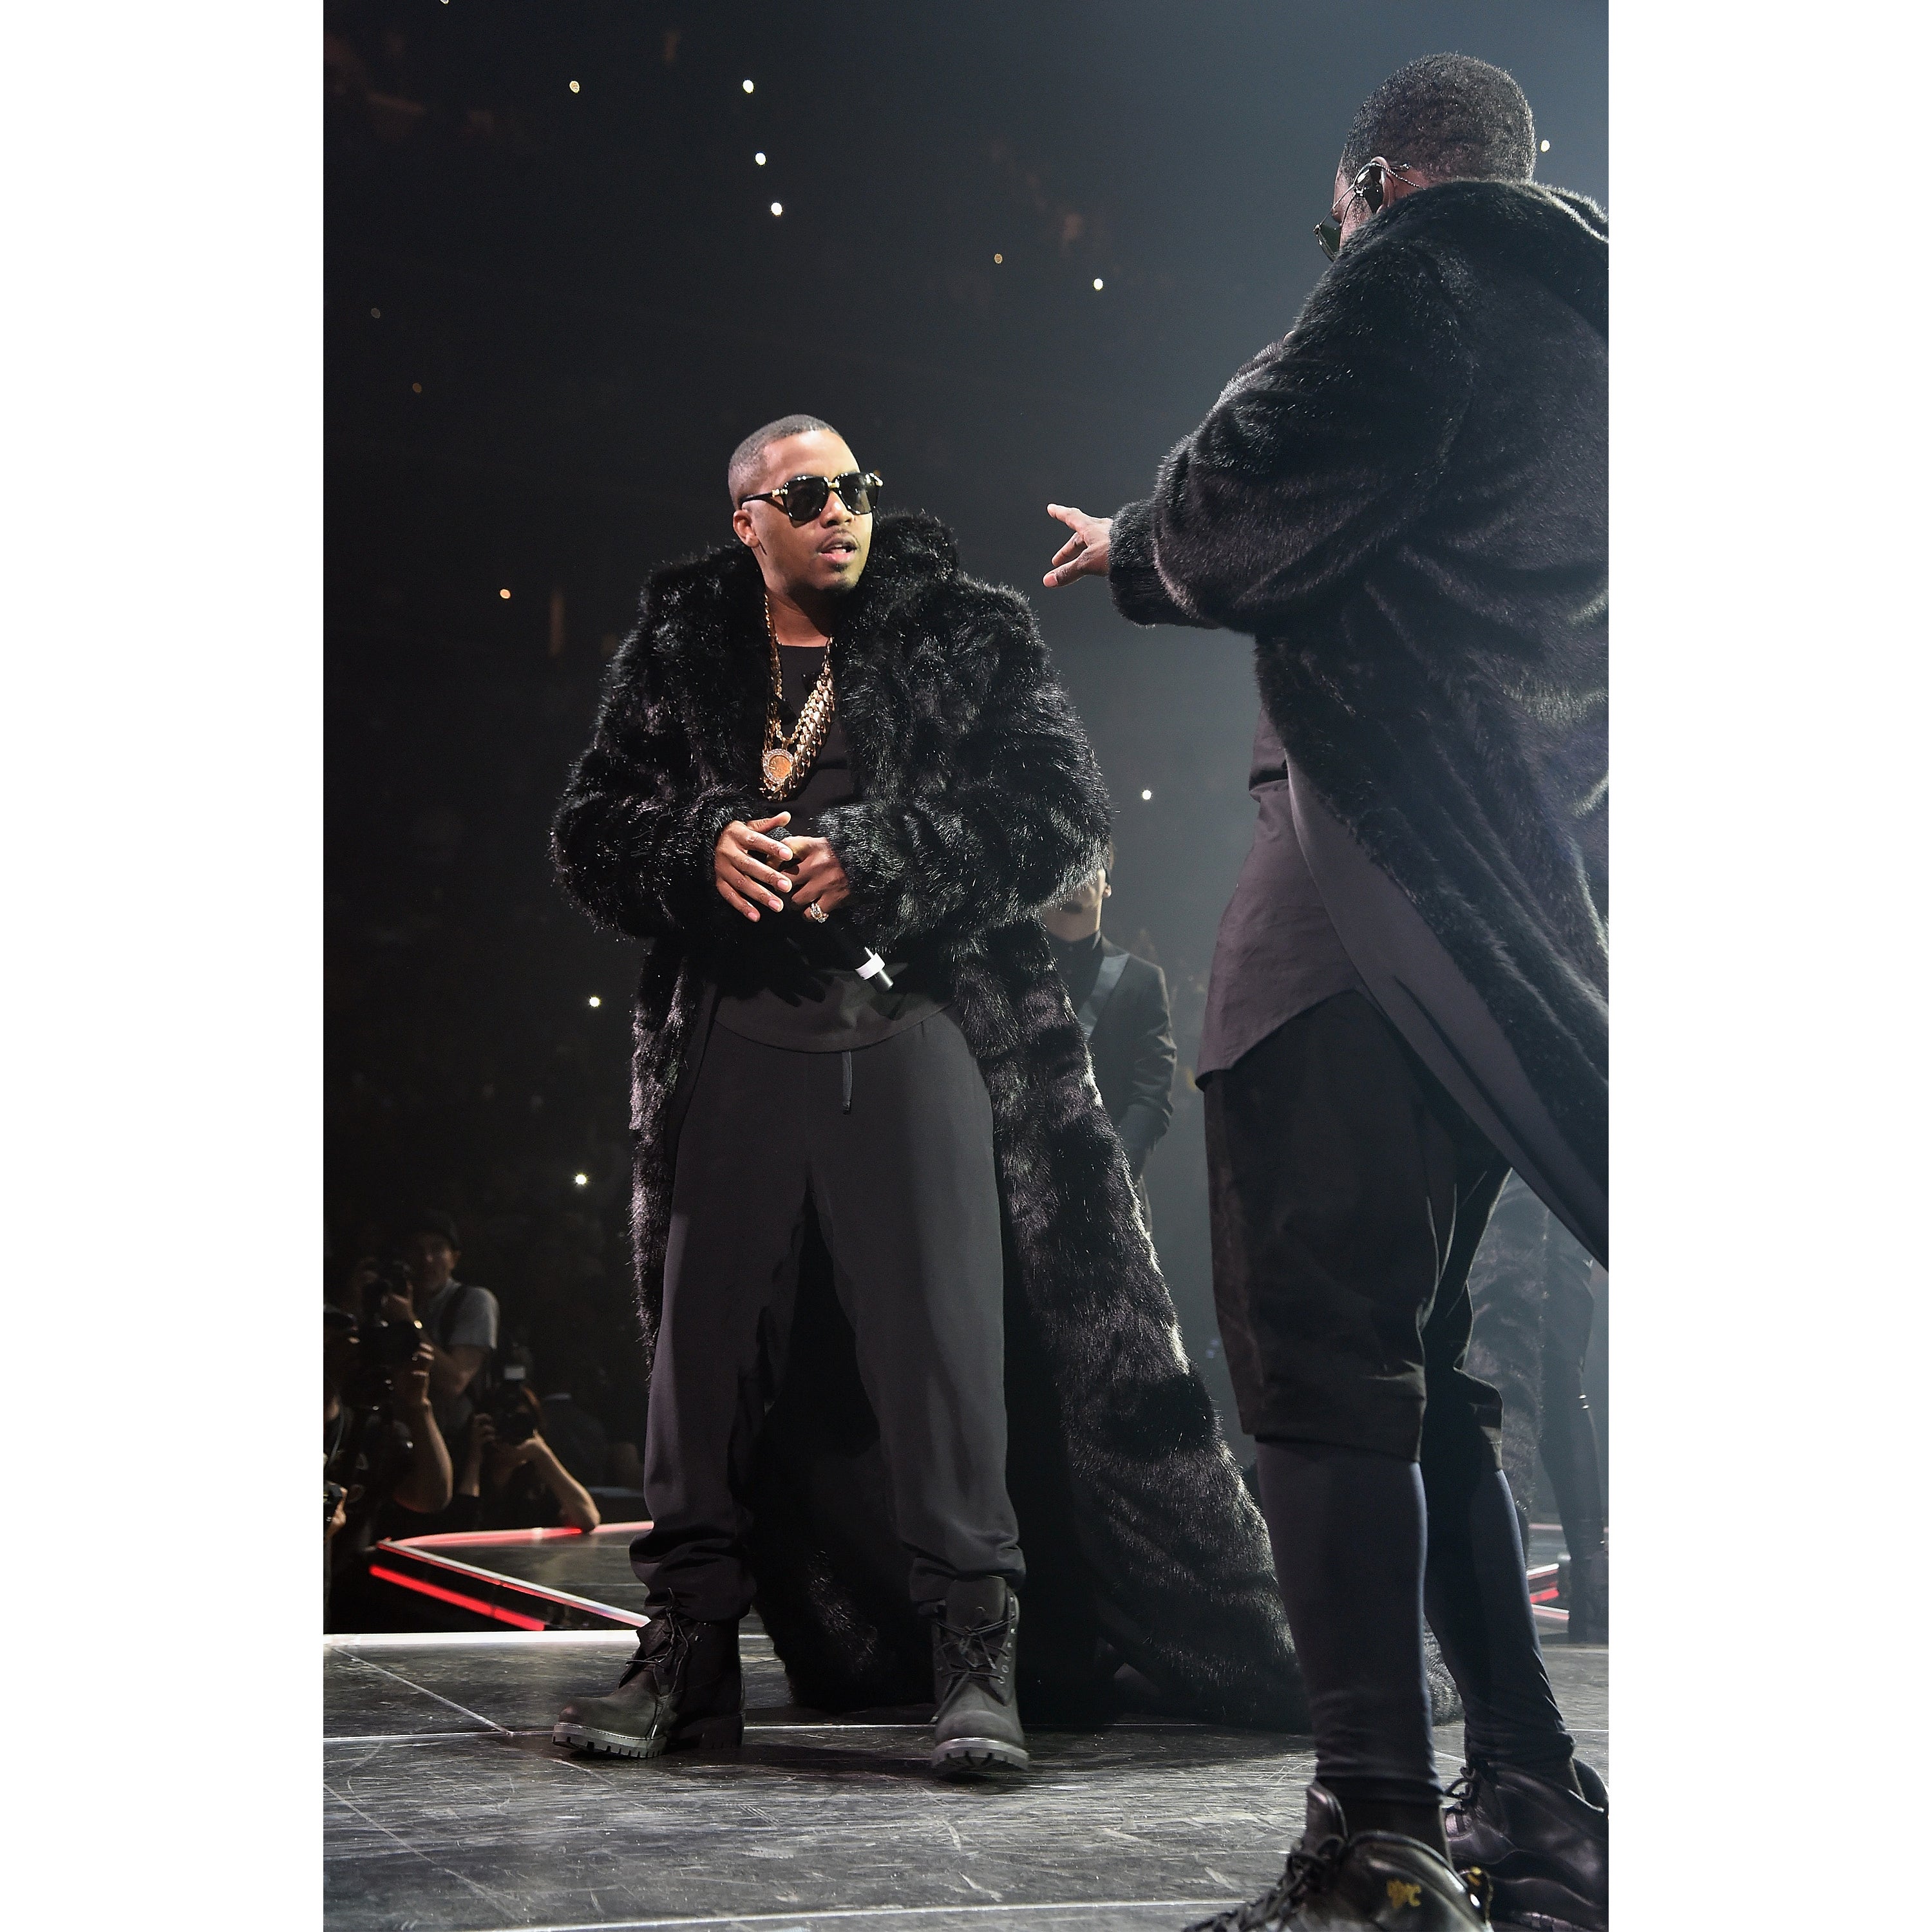 35+ Epic Photos From the Bad Boy Reunion Concert in Honor of Biggie's Birthday
